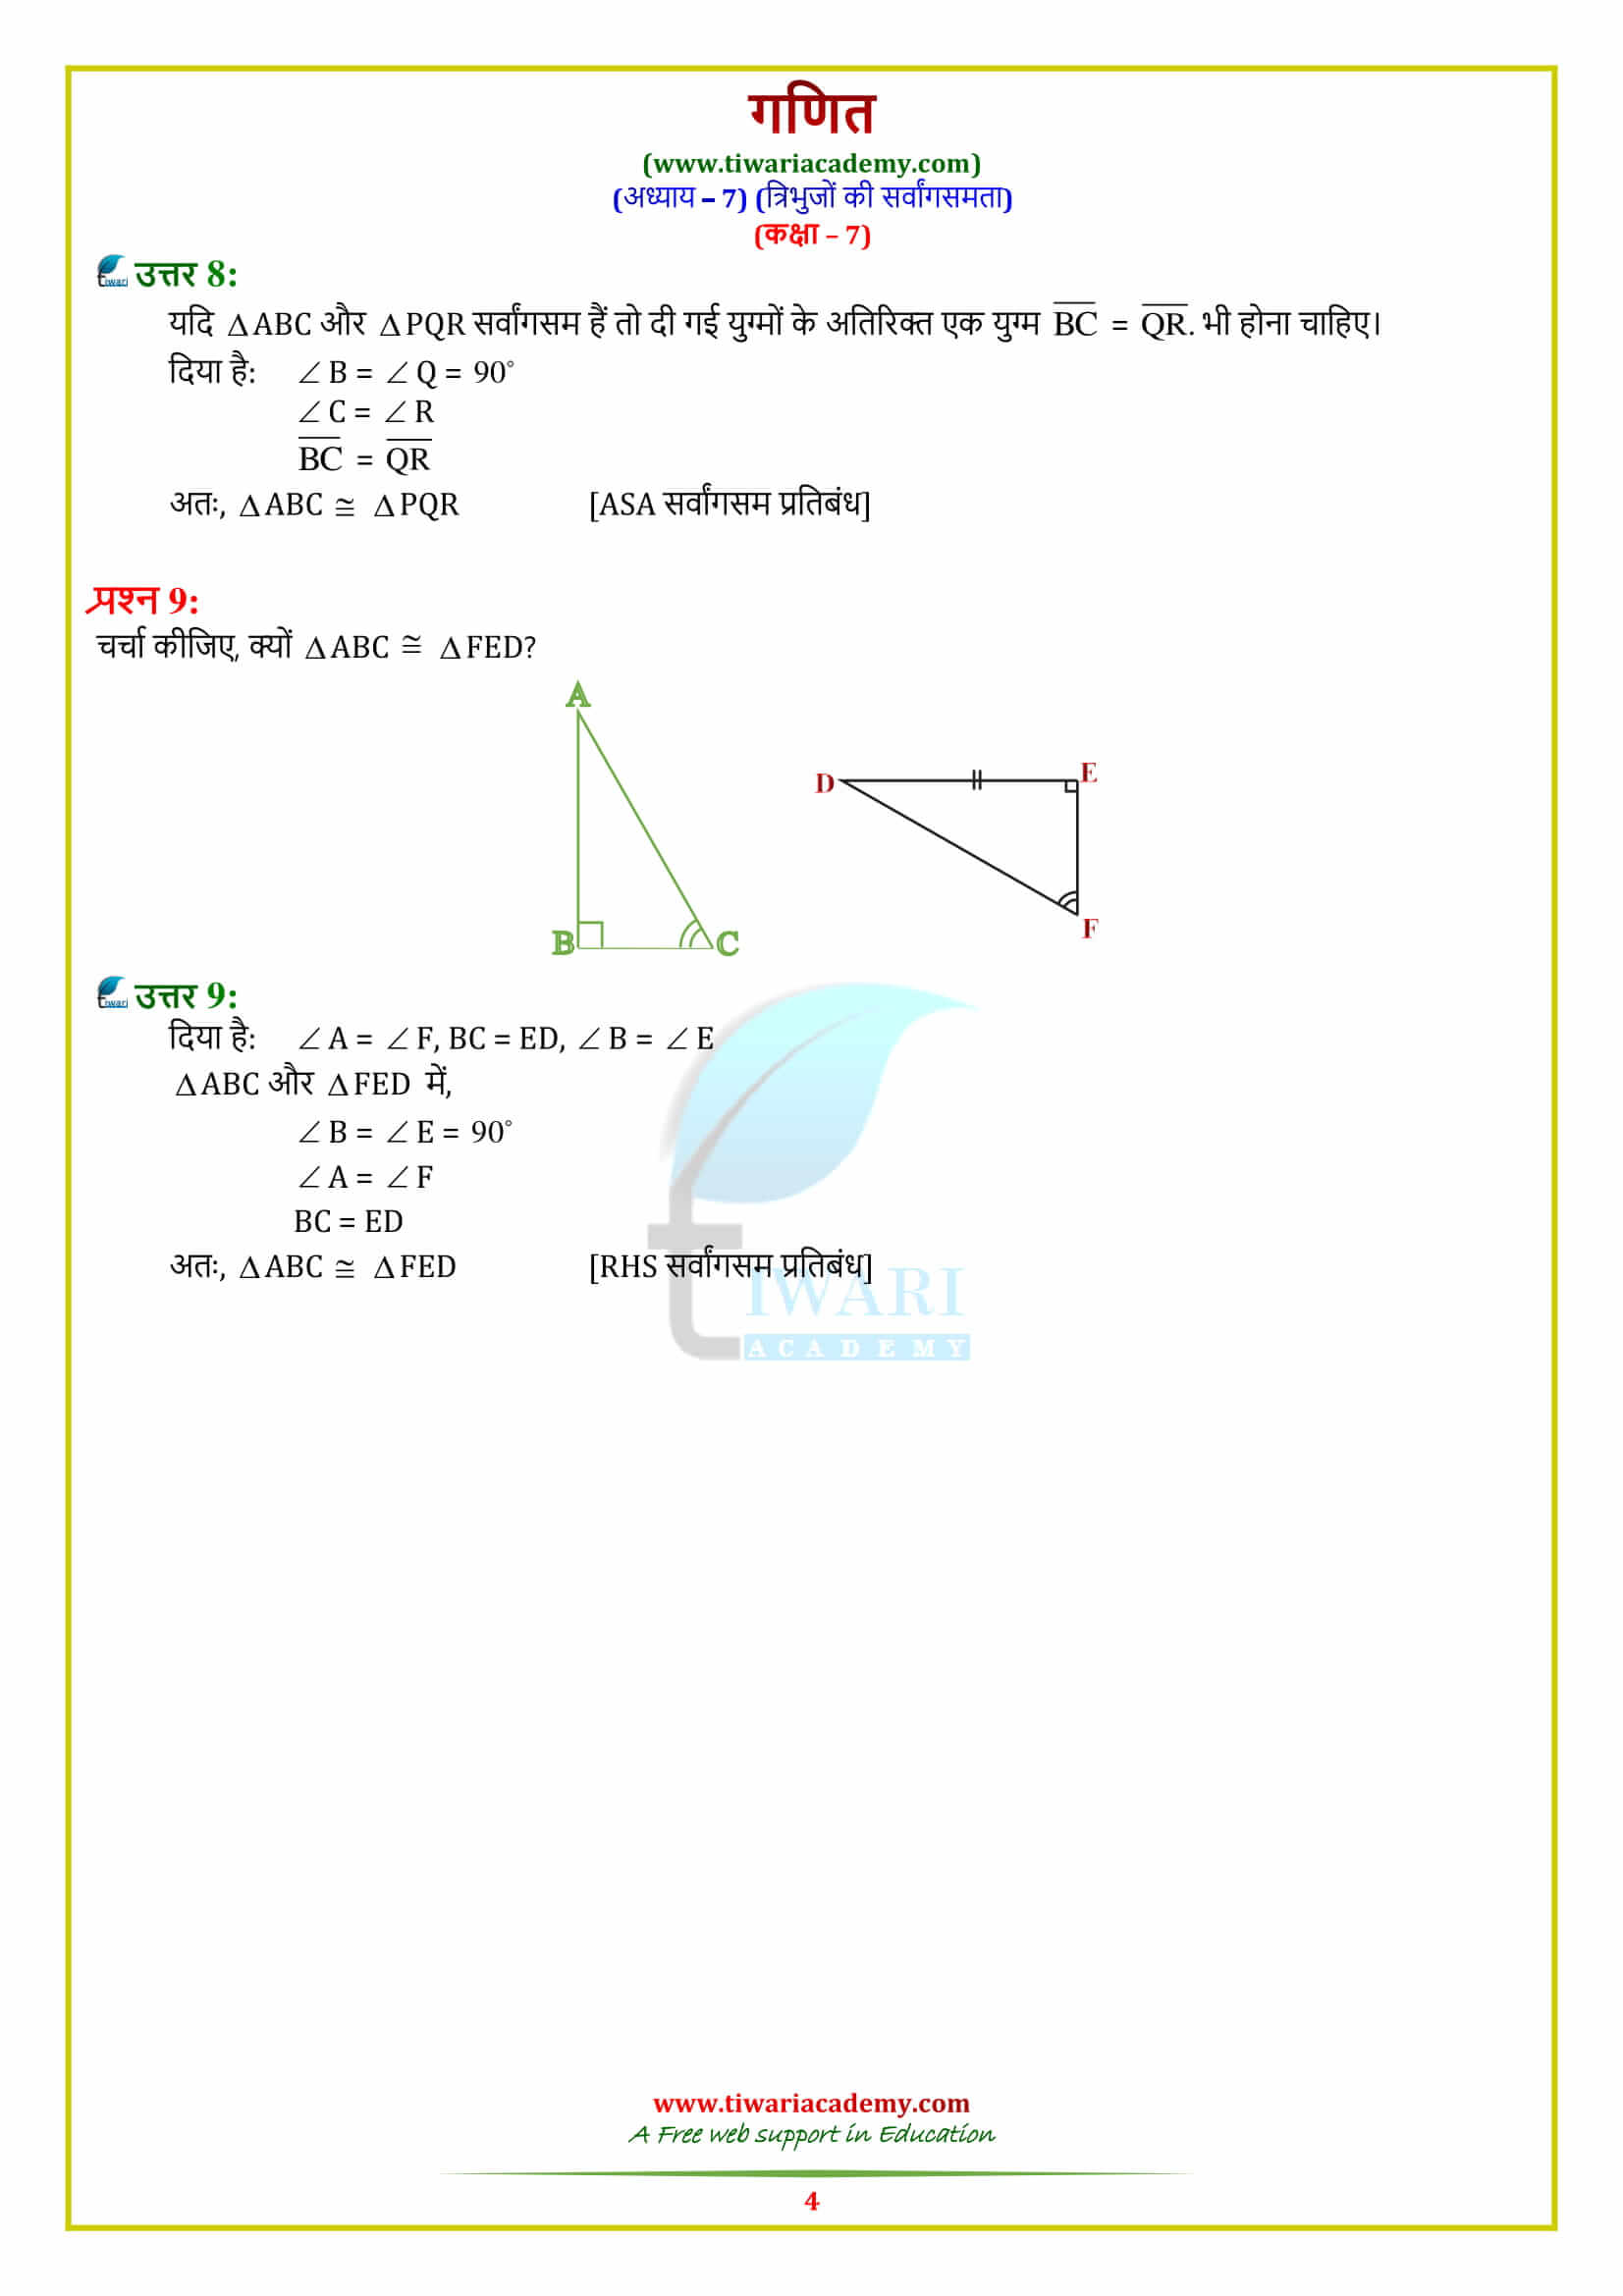 7 Maths Chapter 7 Exercise 7.2 all question answers